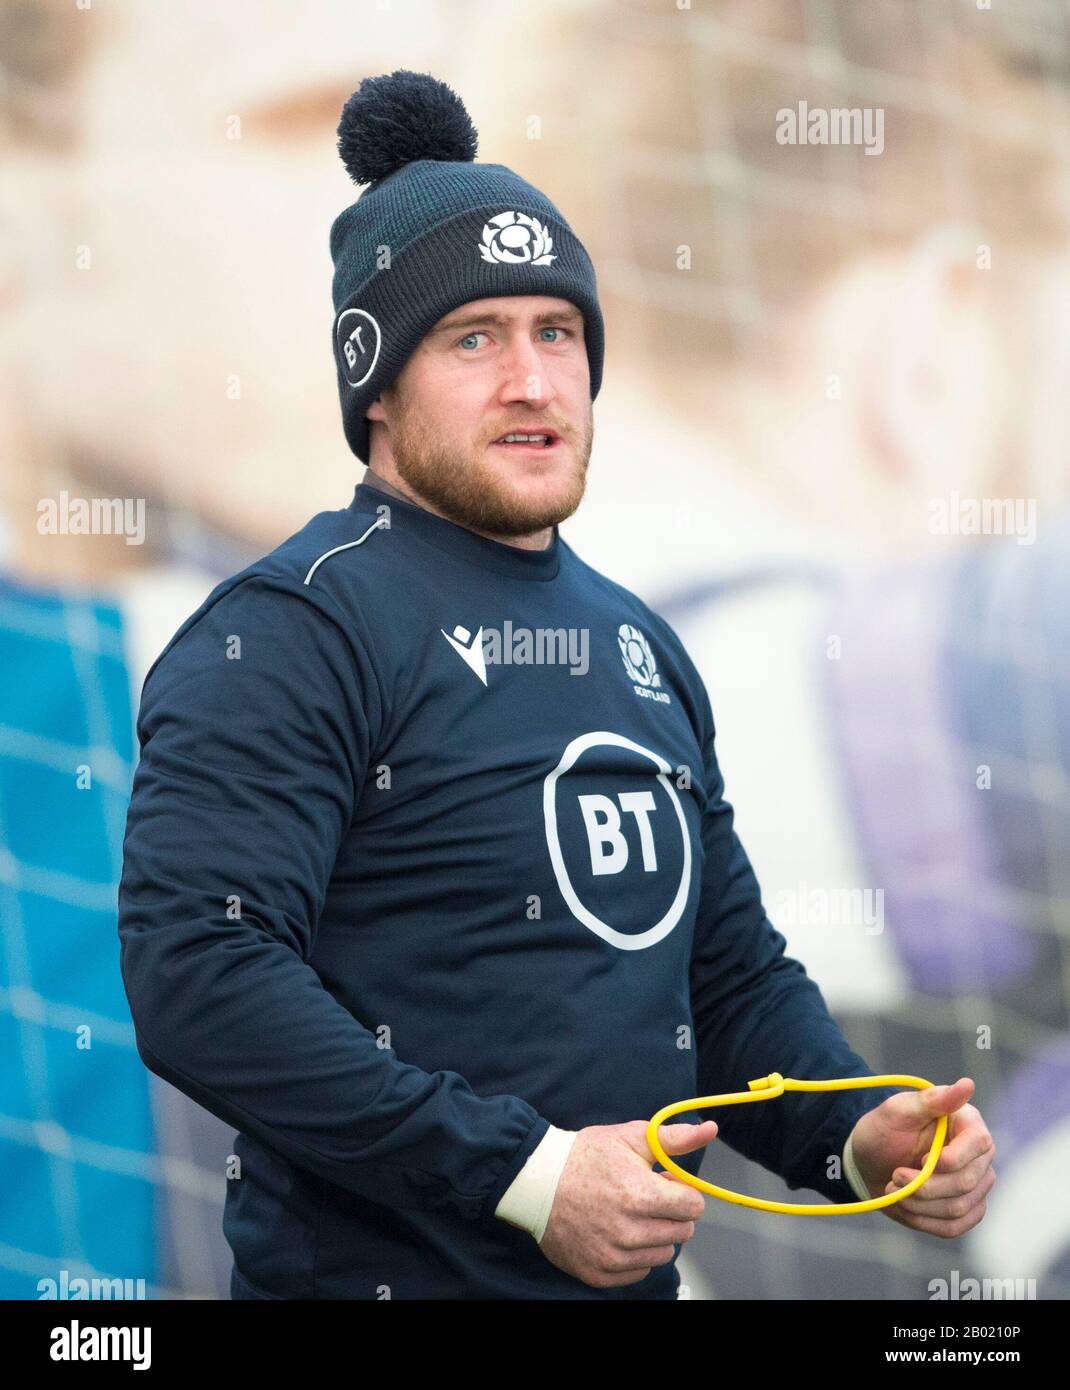 Oriam Sports Centre, Heriot-Watt University's Riccarton campus, Edinburgh: 18th February, 2020. Scotland rugby team training session prior to their Guinness Six Nations match against Italy in Rome. Scotland captain Stuart Hogg. Credit: Ian Rutherford/Alamy Live News Stock Photo